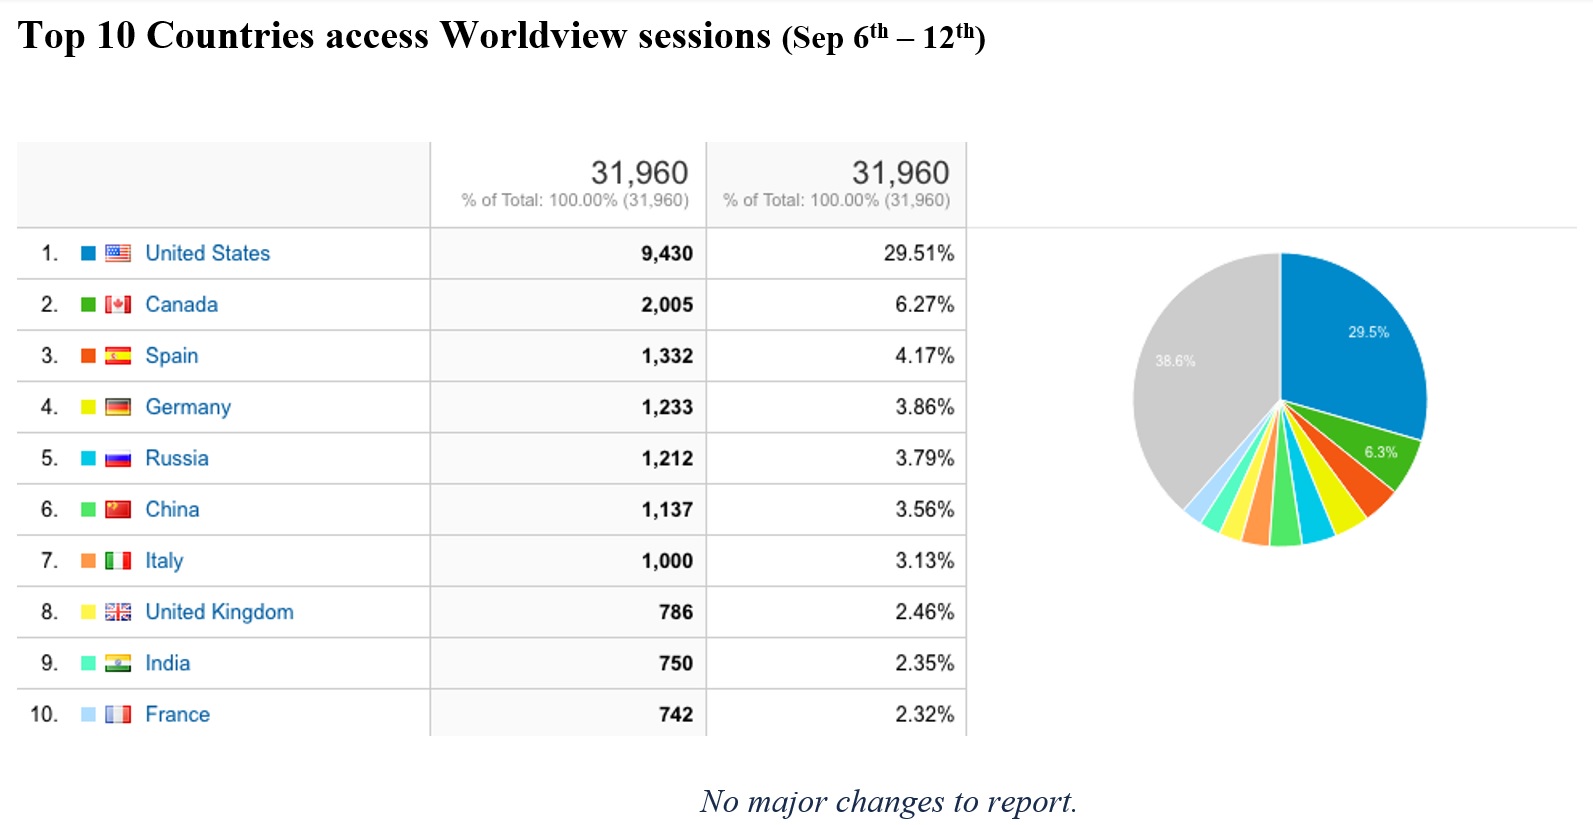 Chart of Worldview sessions by top 10 countries Sep 6-12, 2021.